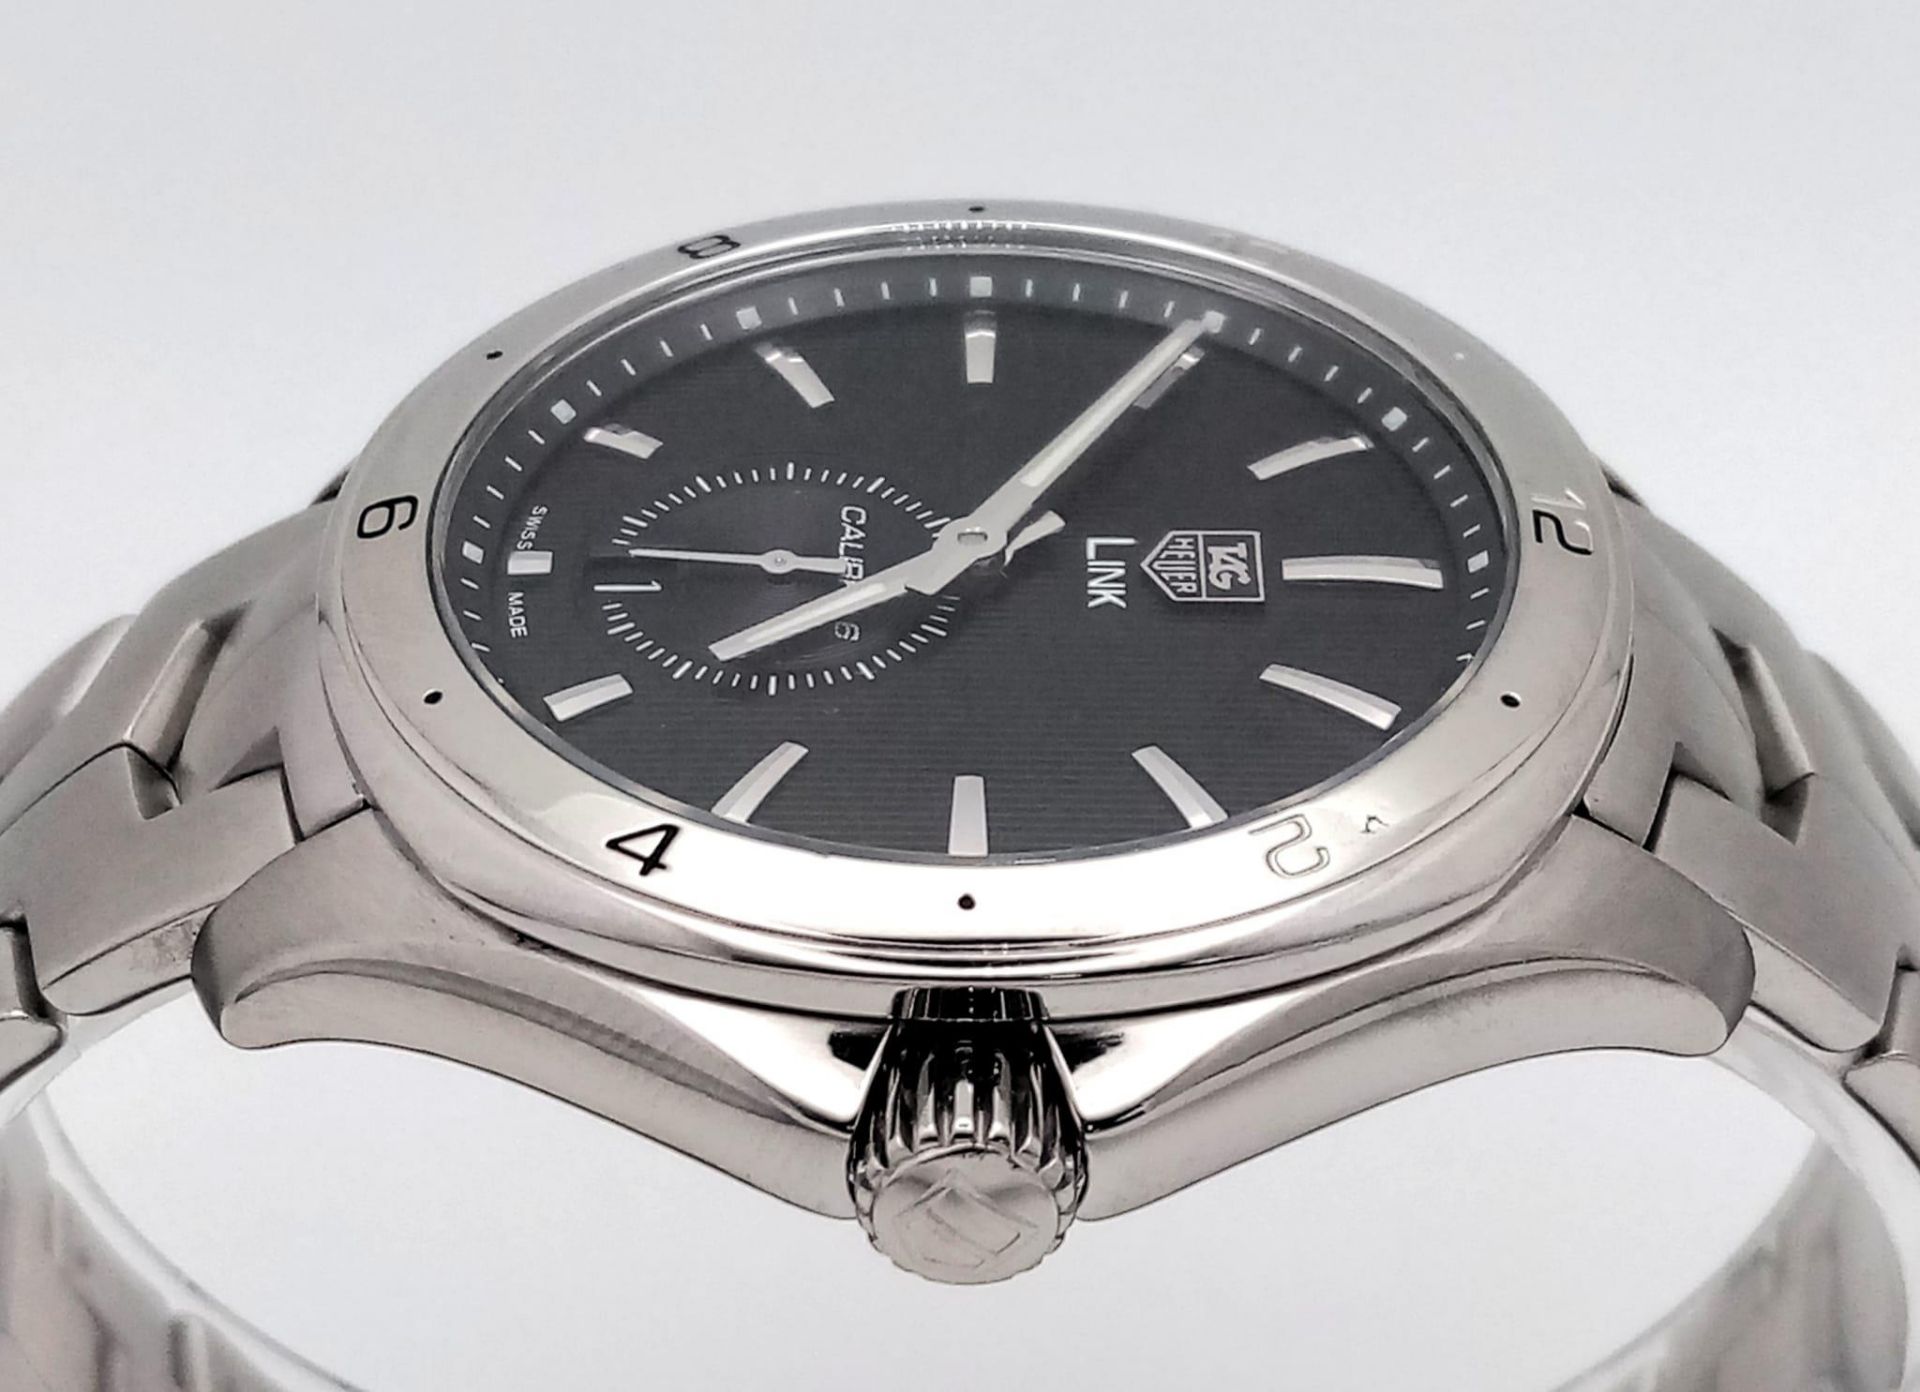 A Tag Heuer Link Calibre 6 Automatic Watch. Stainless steel bracelet and case - 41mm. Black dial - Image 5 of 9